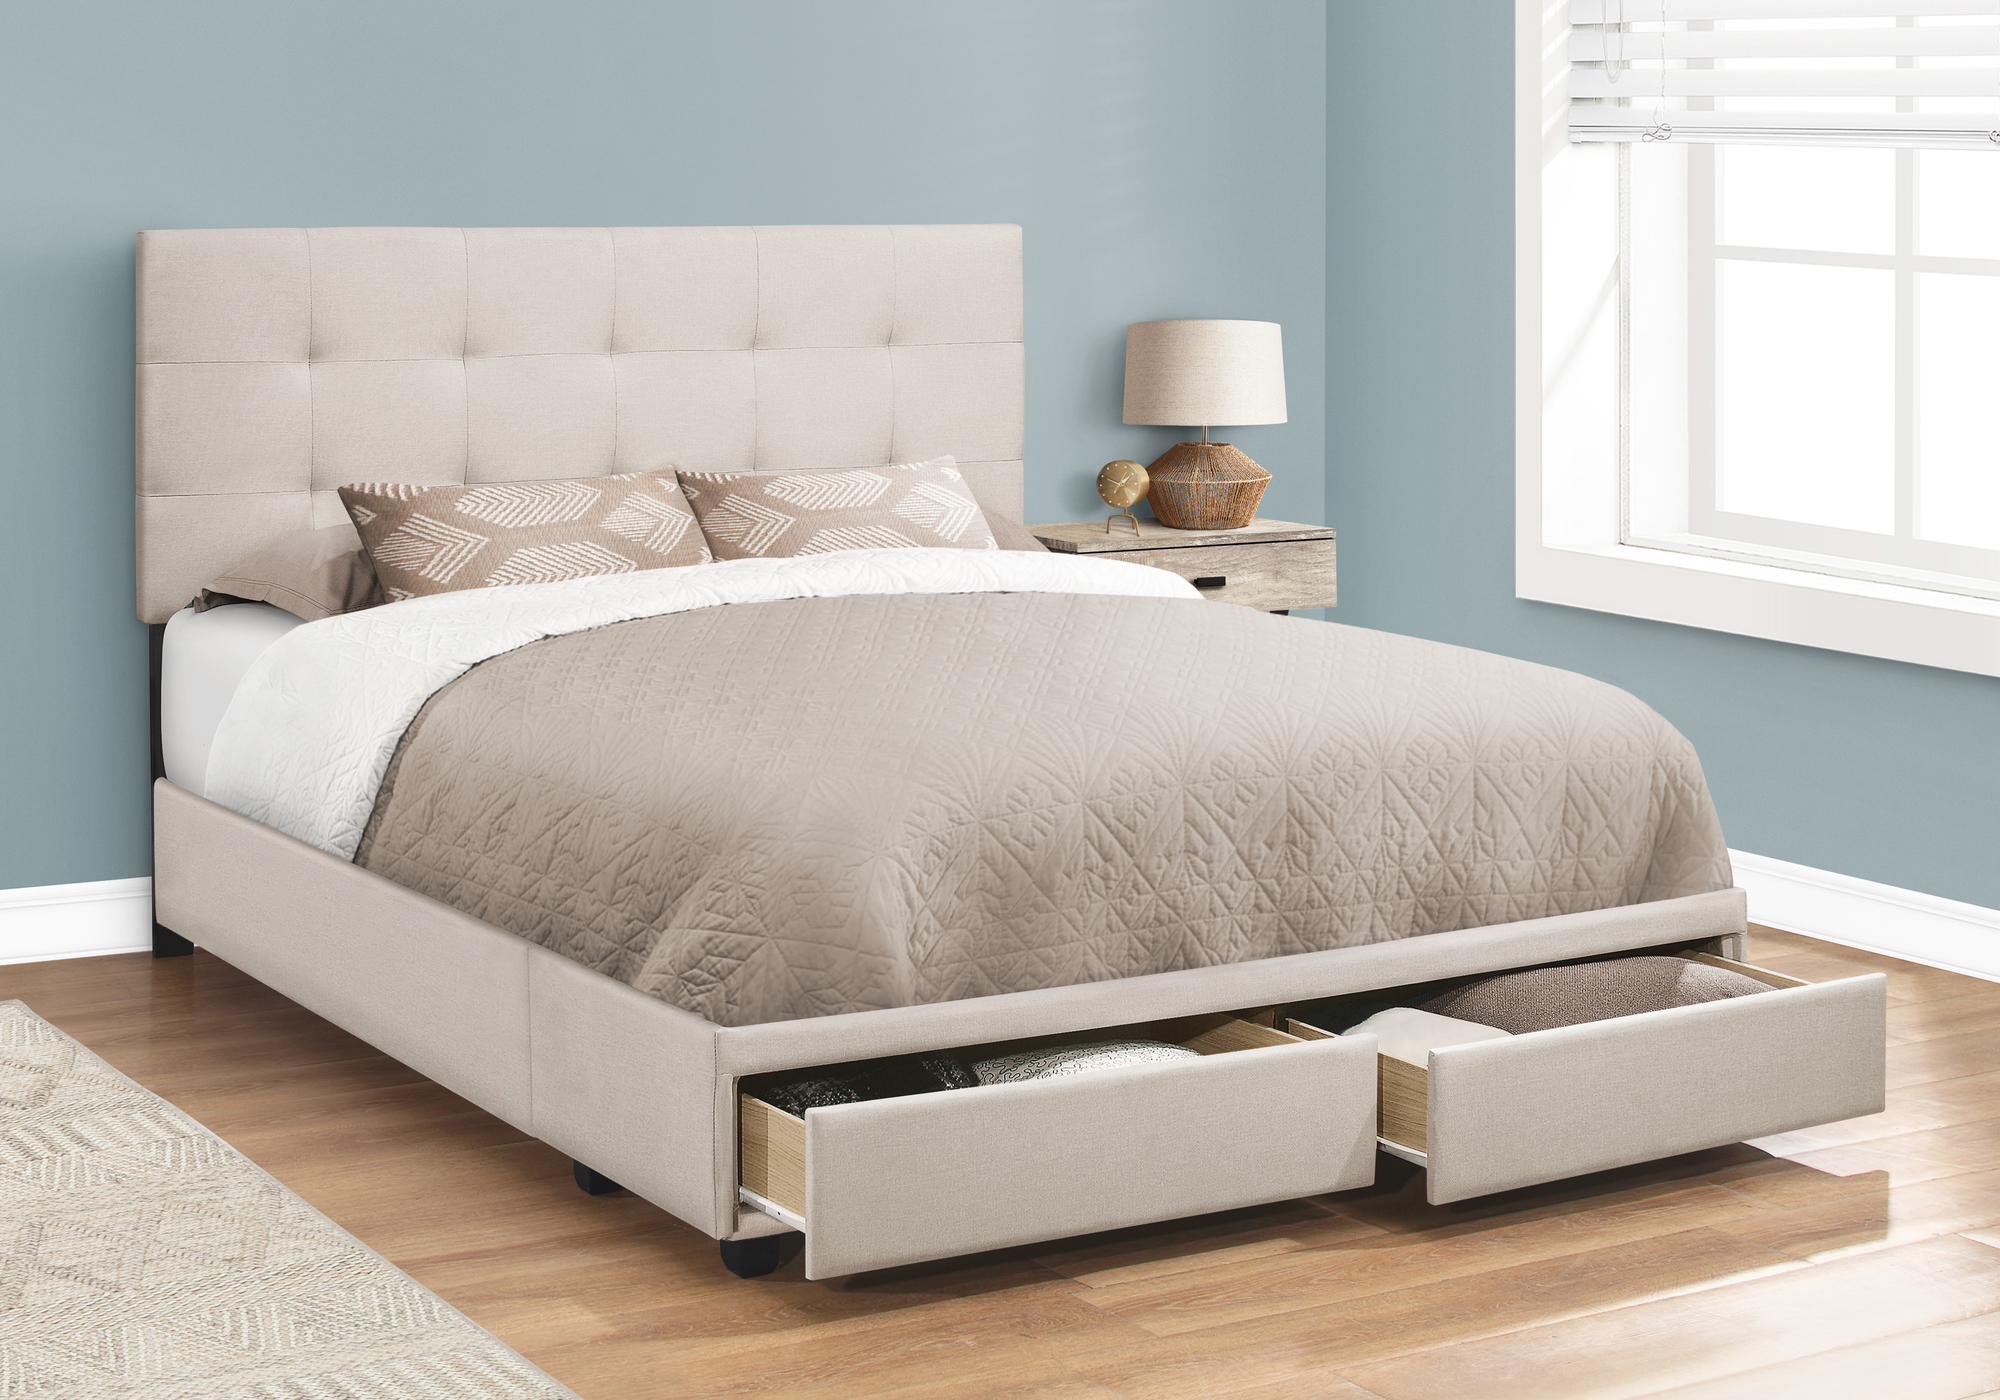 Bed - Queen Size, Beige Linen With 2 Storage Drawers